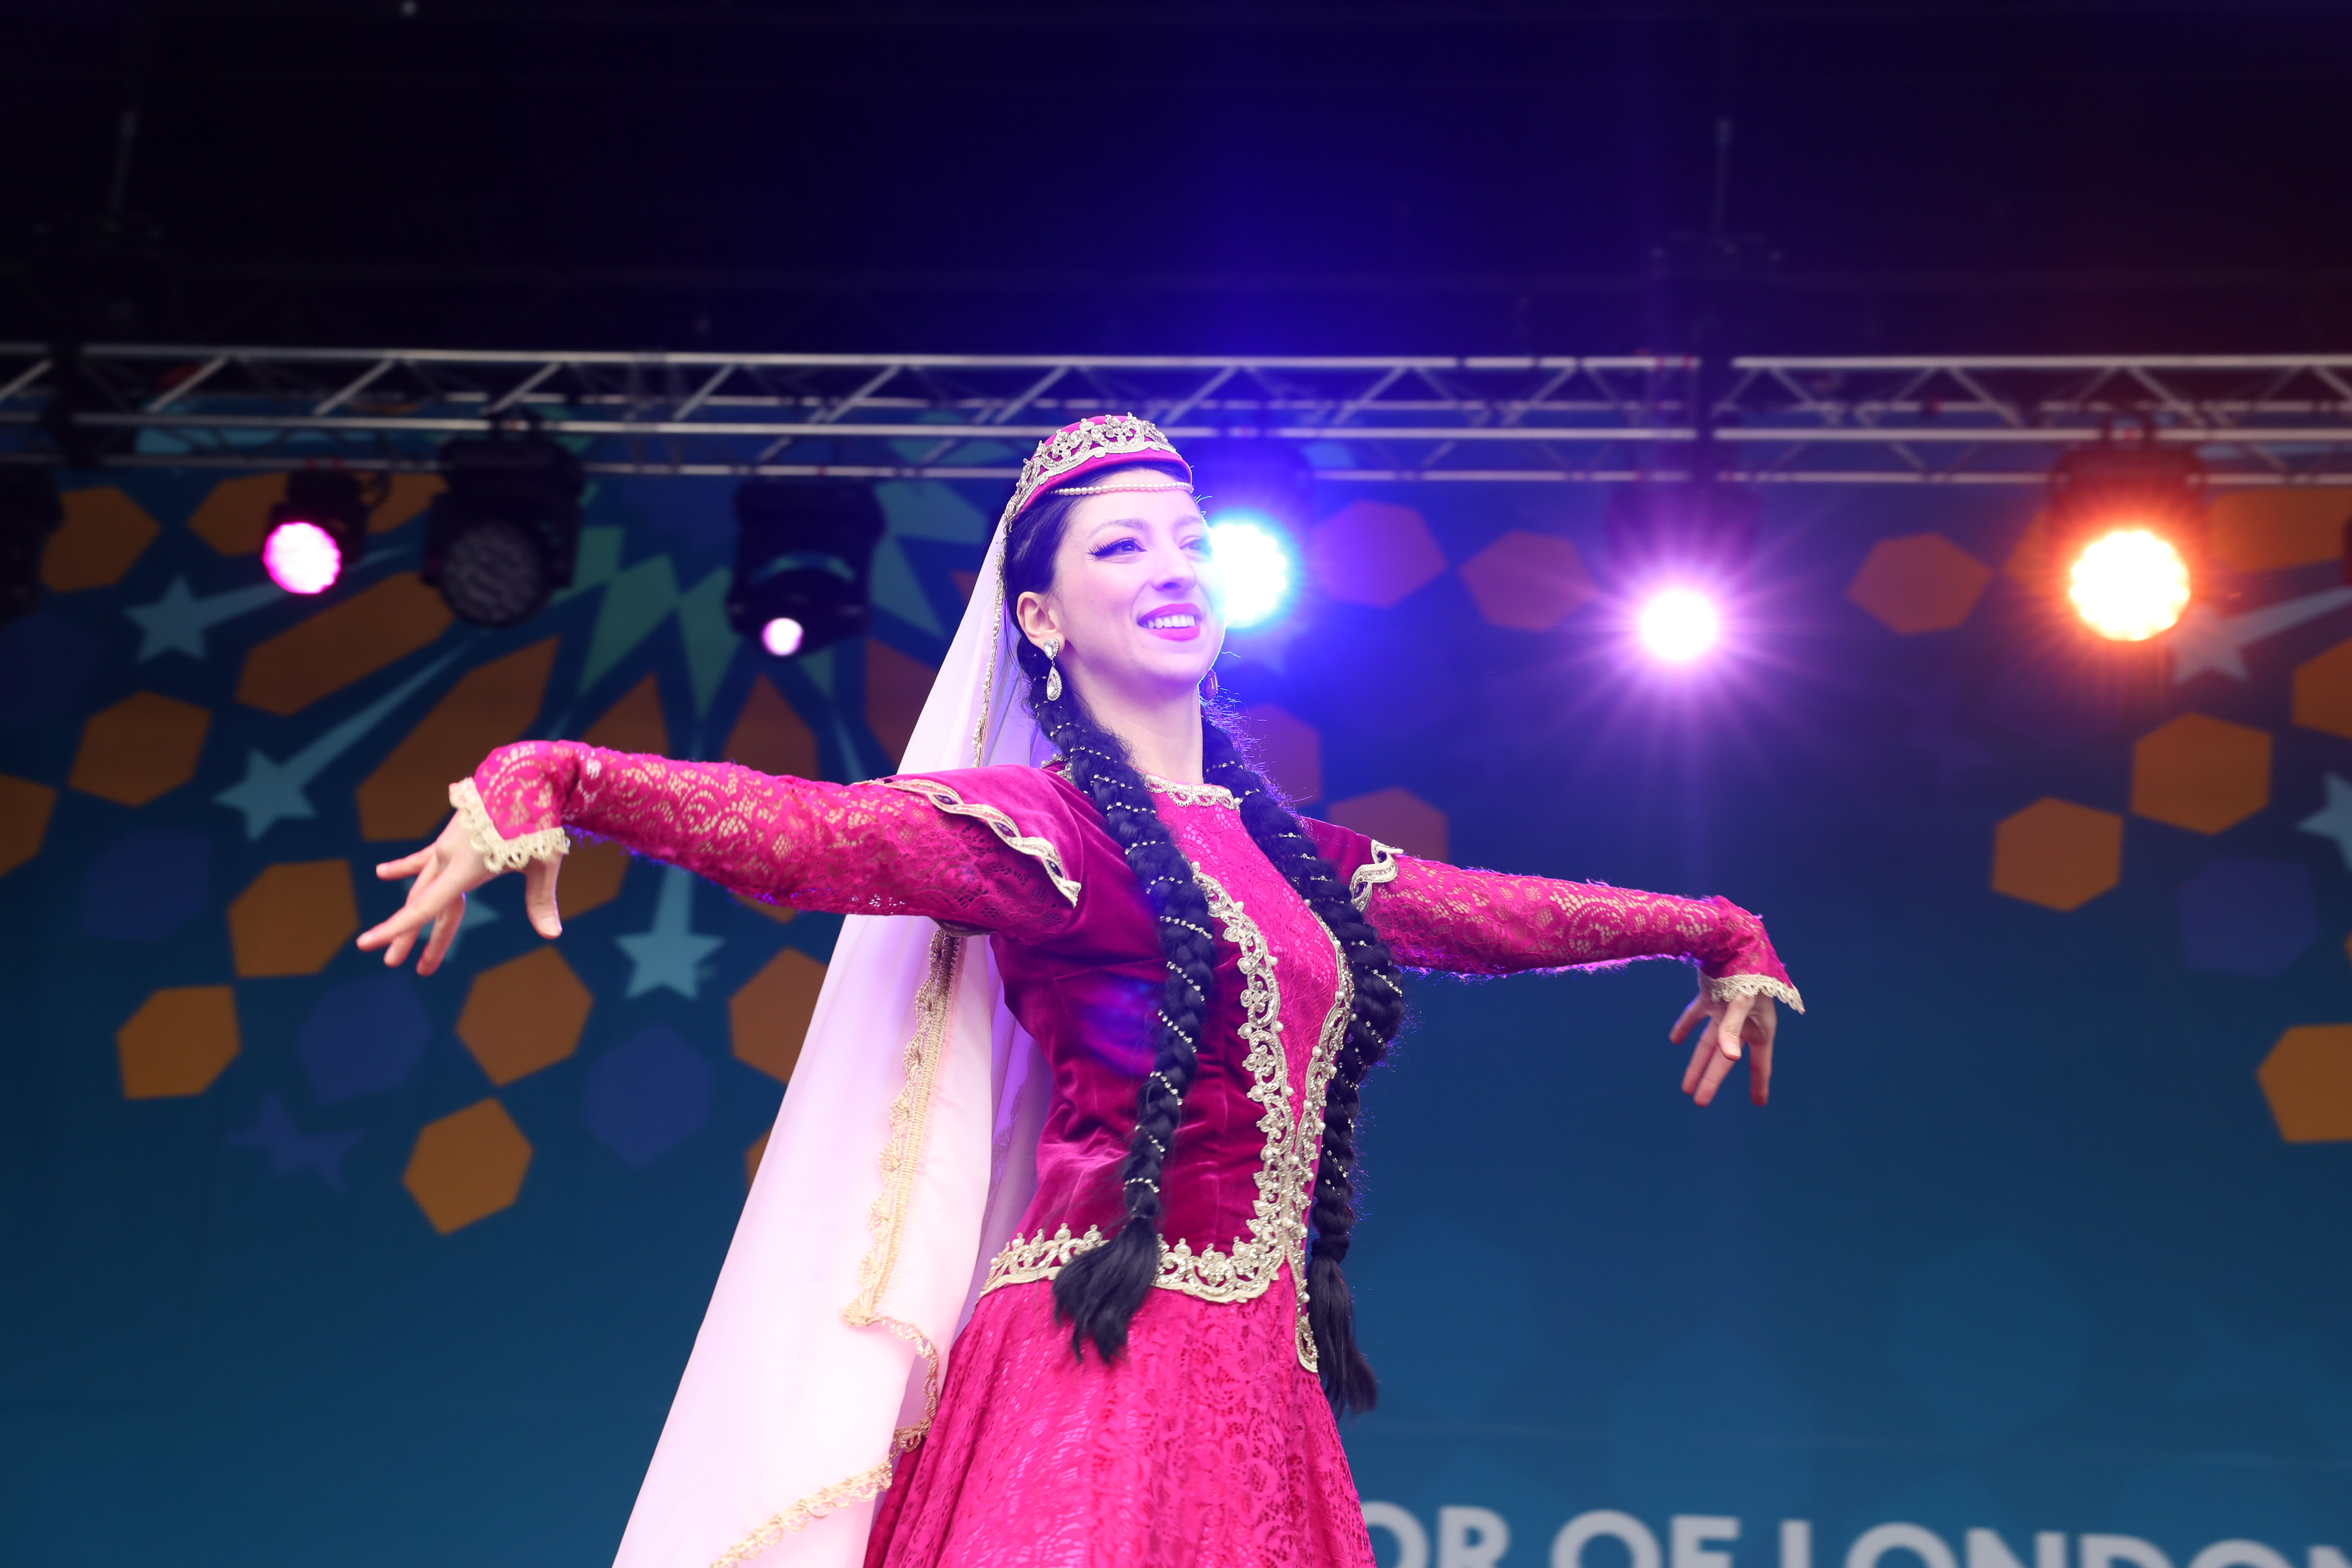 Uzbek traditional dancing at Eid in the Square in London